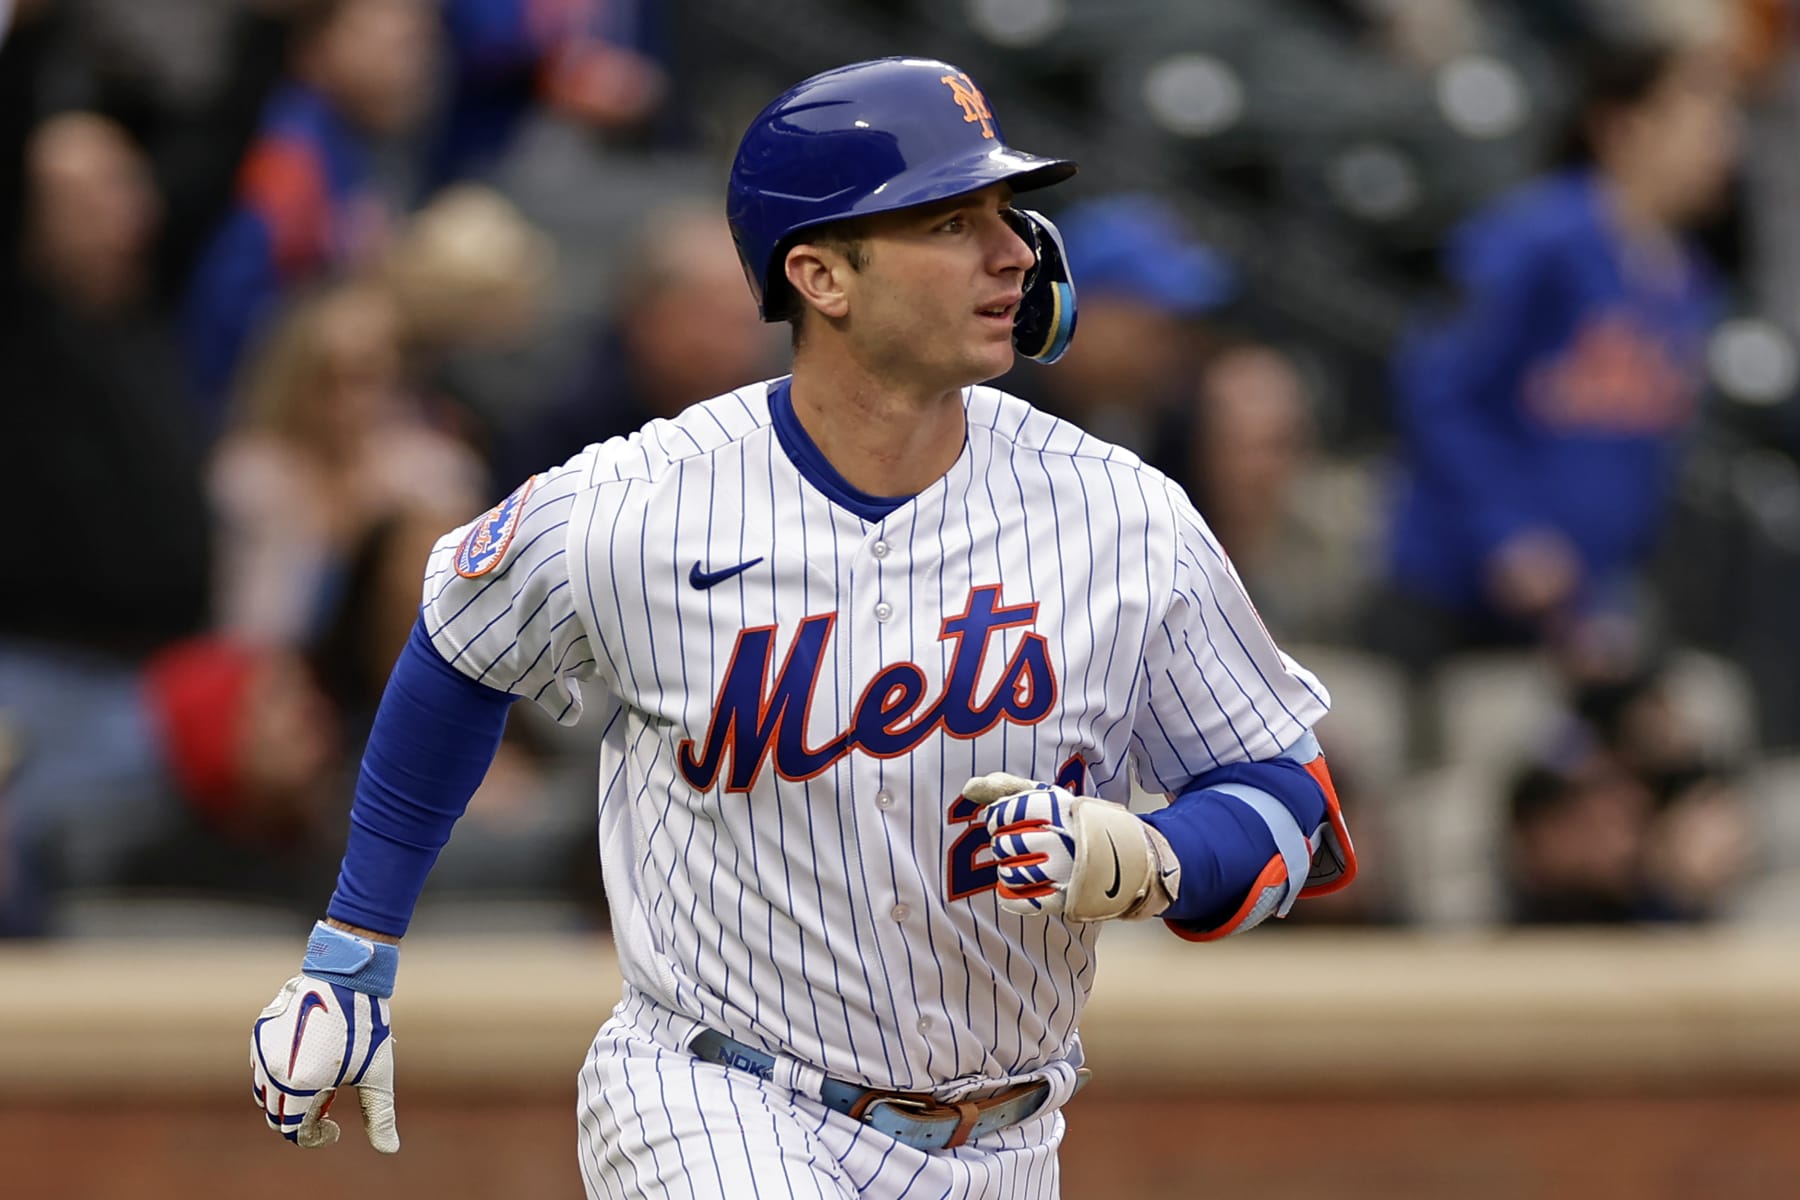 Pete Alonso thriving as Mets' DH but wants to play first base